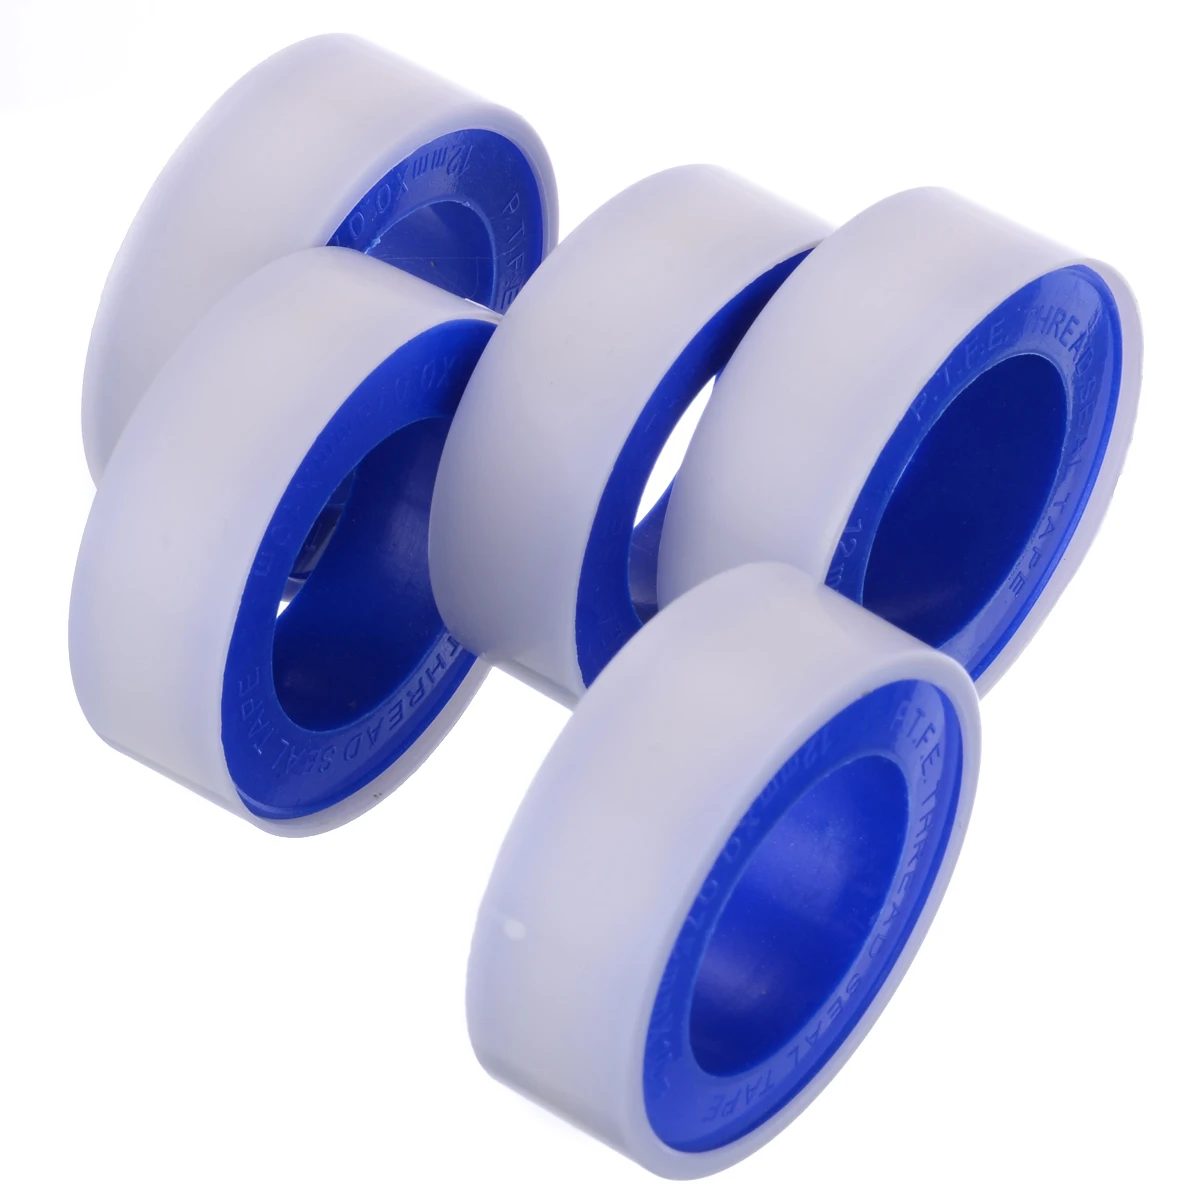 5pcs Roll Teflon Joint Plumbing Fitting Thread Seal Tape PTFE for Water Pipe Plumbing Sealing Tapes